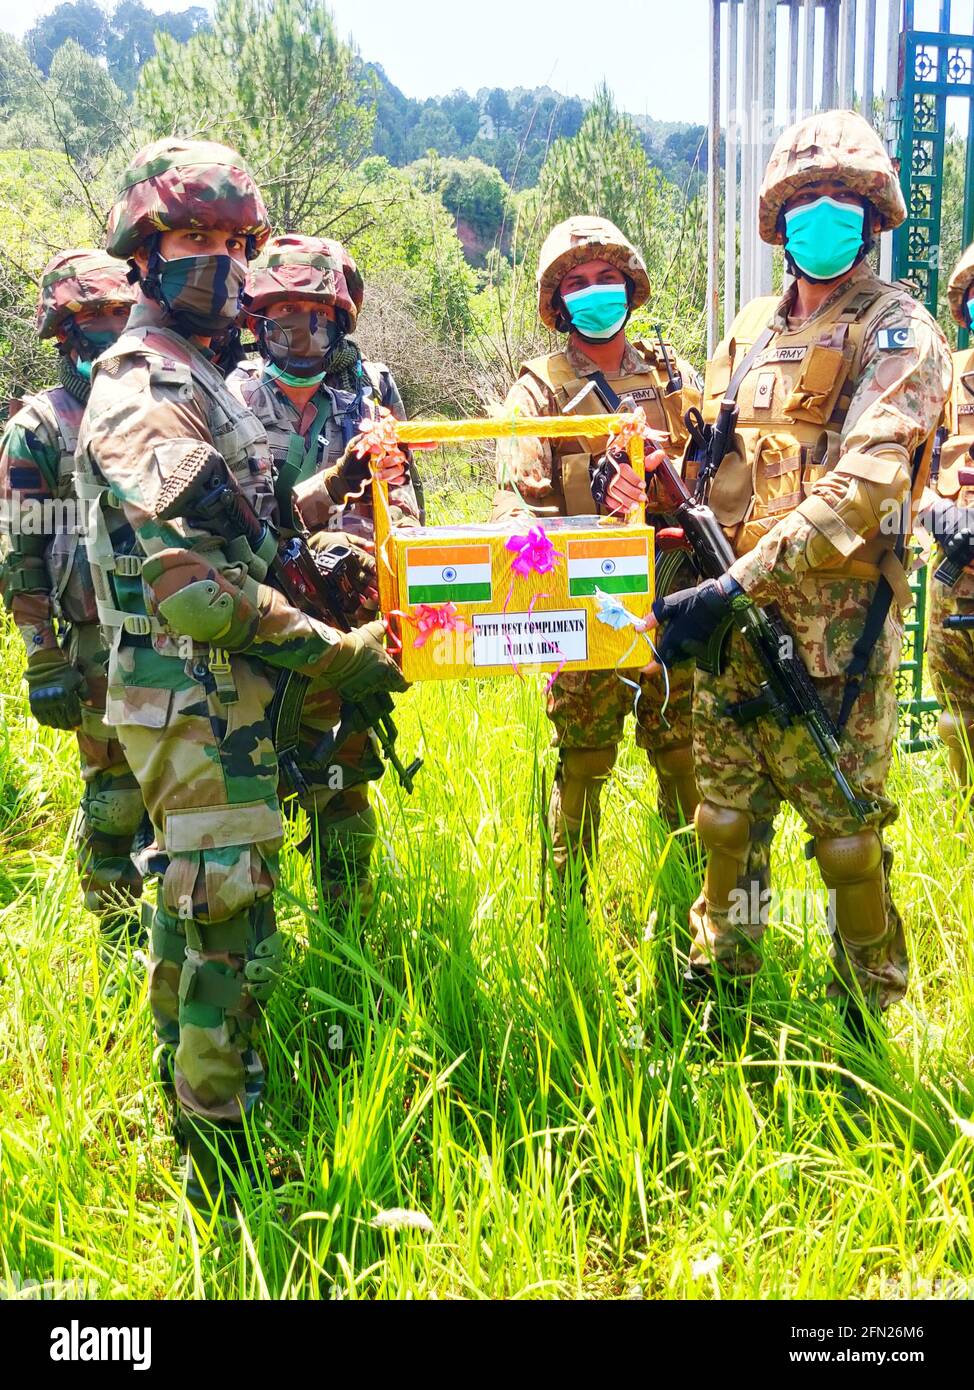 Poonch, Jammu and Kashmir, India. May 13, 2021: Indian Army & Pakistan Army celebrated Eid-ul-Fitr on the Line of Control (LoC) at Poonch-Rawalakot Crossing Point & Mendhar-Hotspring Crossing Point in Poonch district of Jammu & Kashmir on 13 May 21. Sweets and compliments were exchanged by the representatives of both the Armies in an atmosphere of bonhomie & festivities. The ceremony is seen as a confidence building measures in the backdrop of recently agreed ceasefire between both the countries. Credit: ZUMA Press, Inc./Alamy Live News Stock Photo